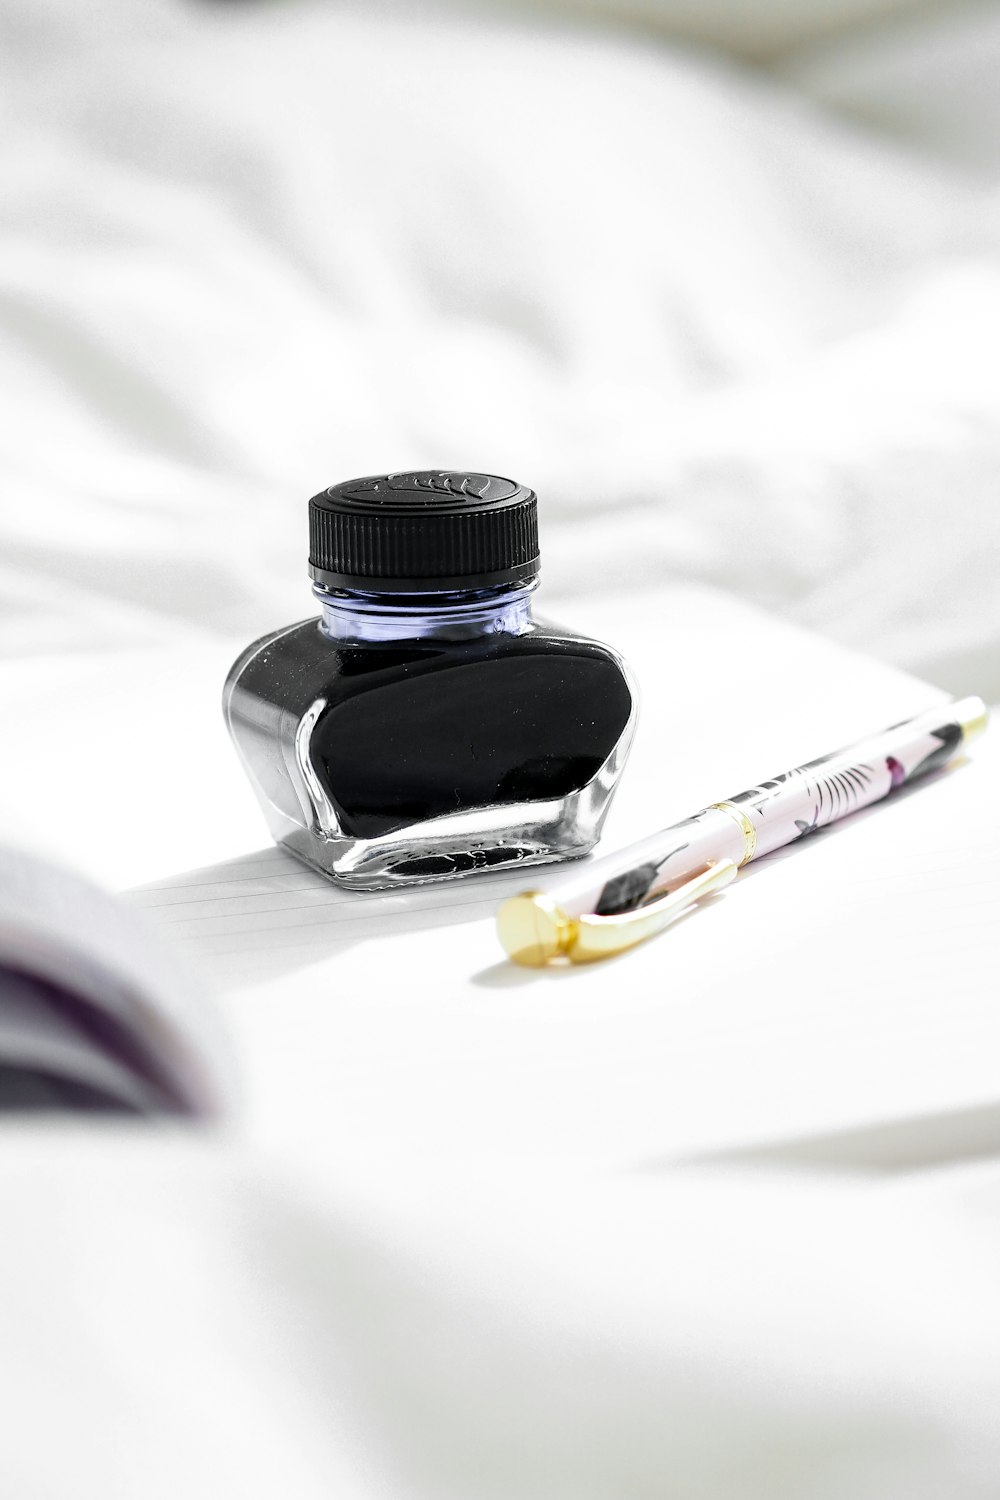 white and yellow click pen beside black glass bottle